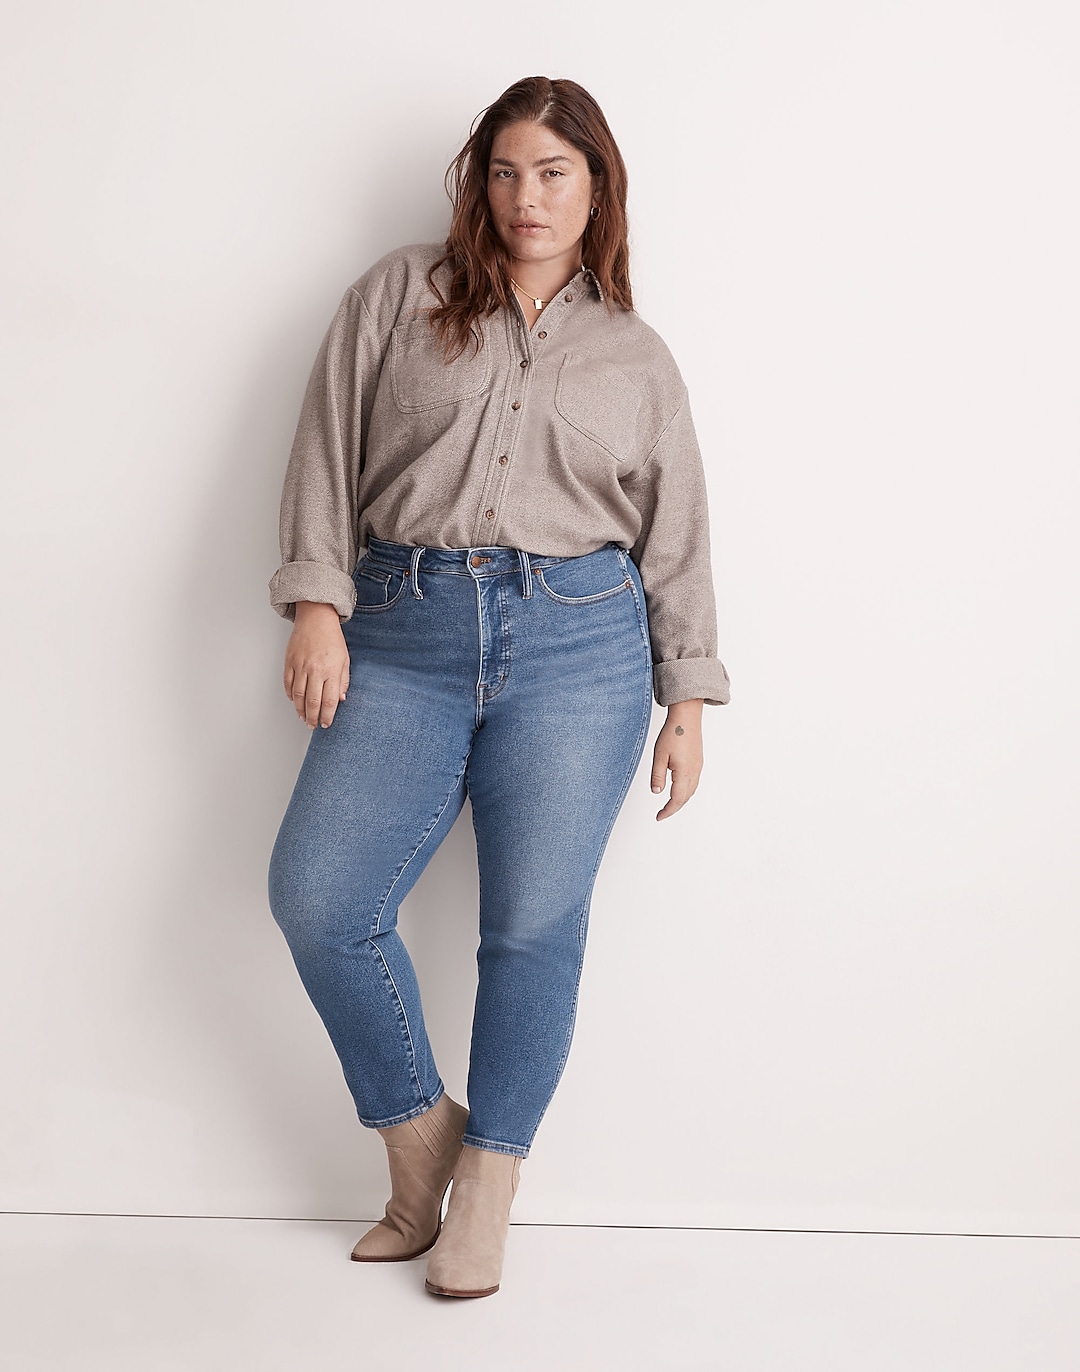 Plus Curvy Stovepipe Jeans in Leaside Wash | Madewell